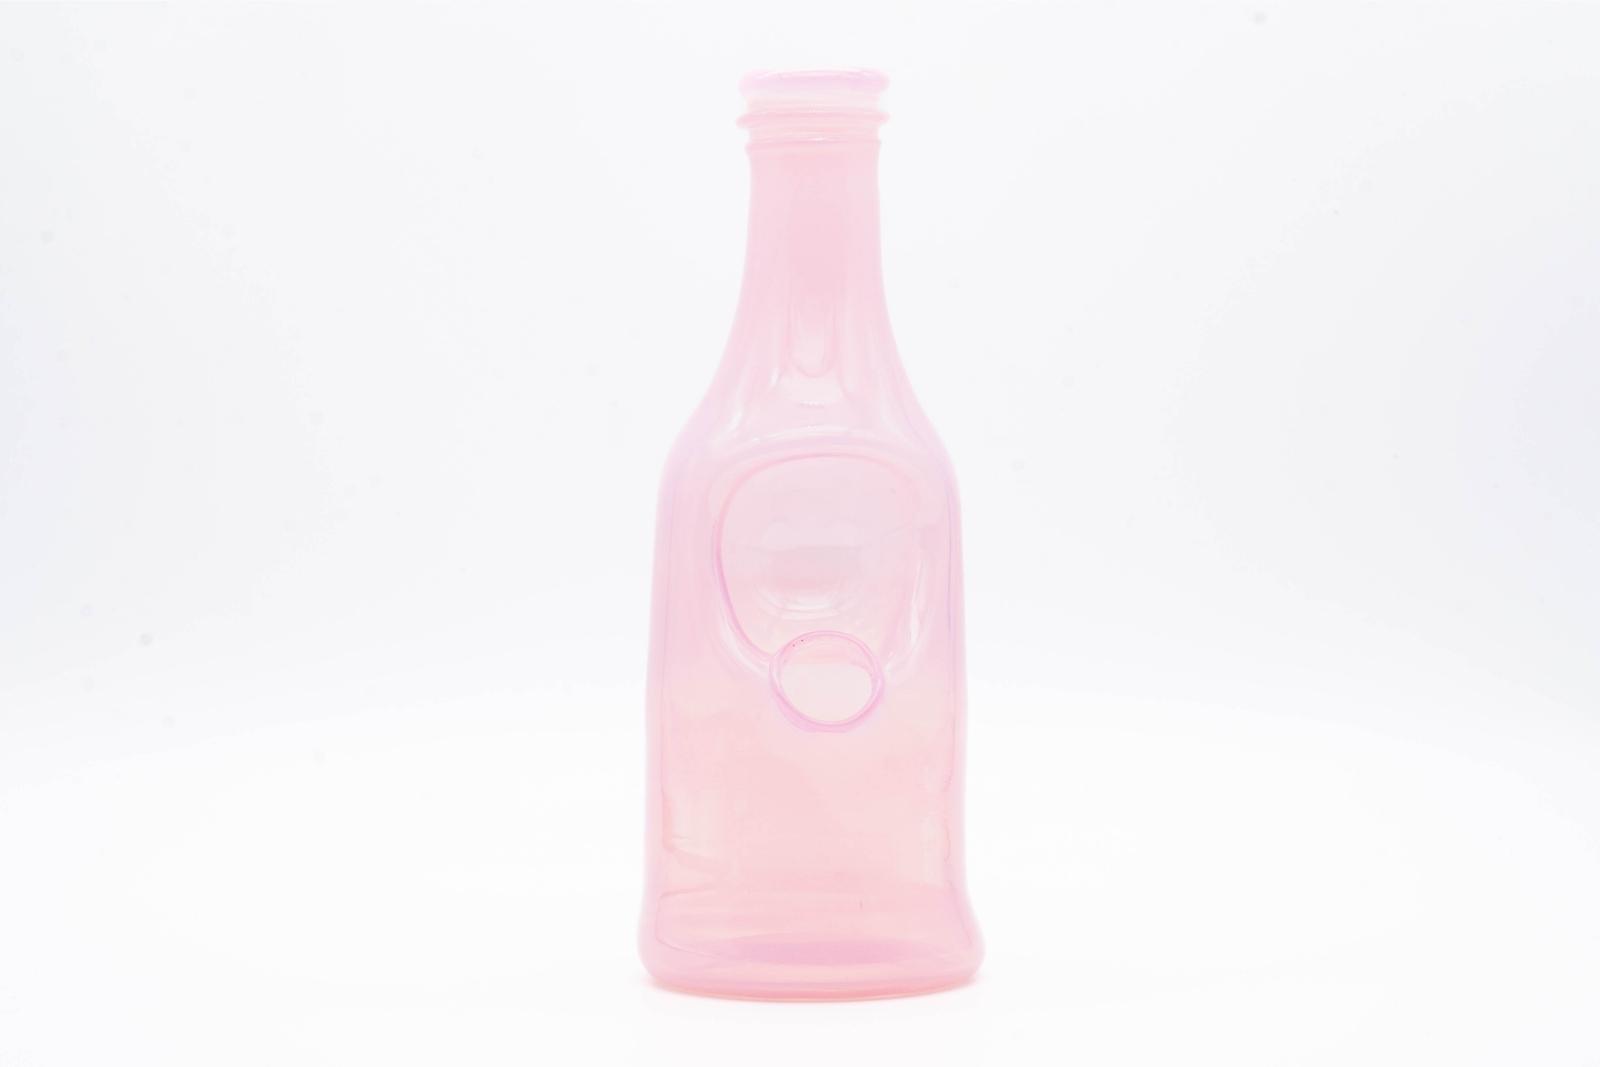 A pink sake bottle rig by Costa Glass, on a white background